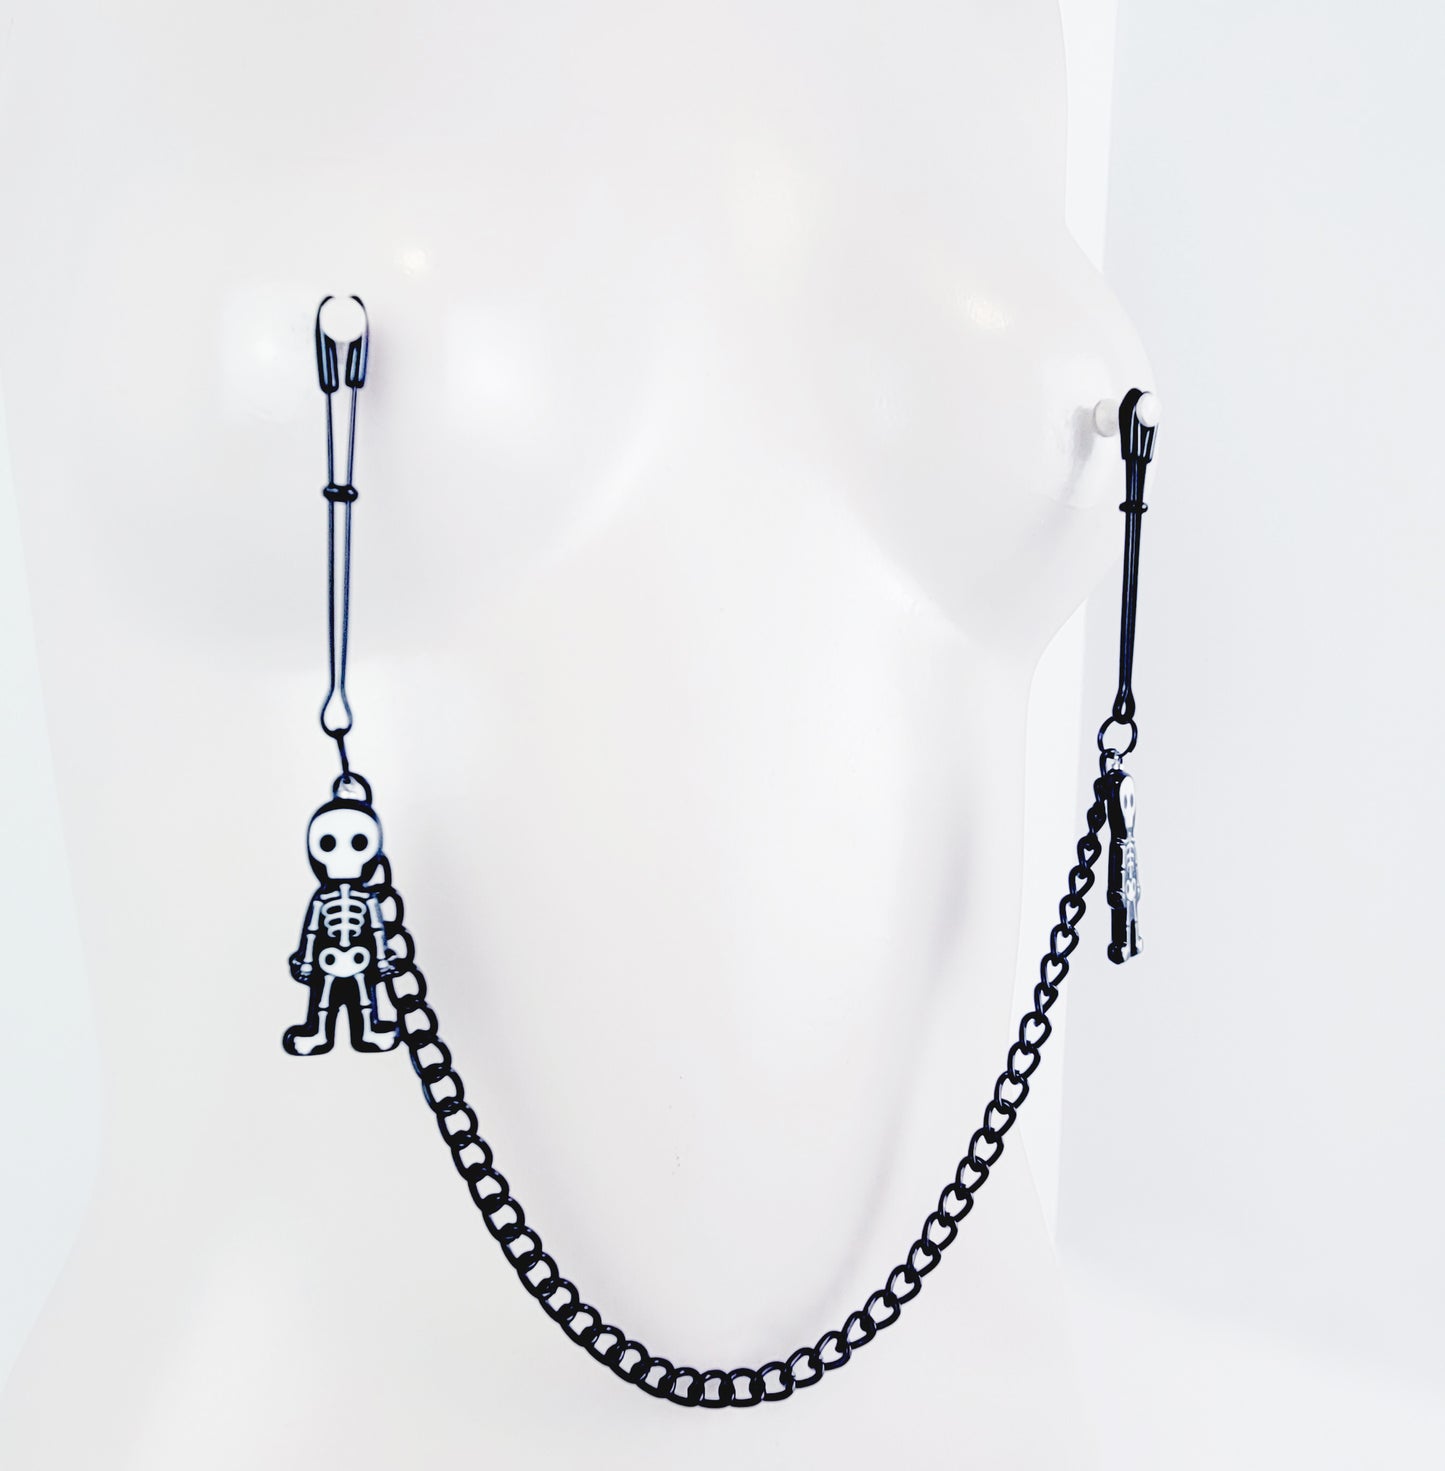 Nipple Clamps with Skeletons. Black Tweezer Clamps attached with Black Chain. Adult Toy for Nipple Play. Halloween, BDSM, MATURE